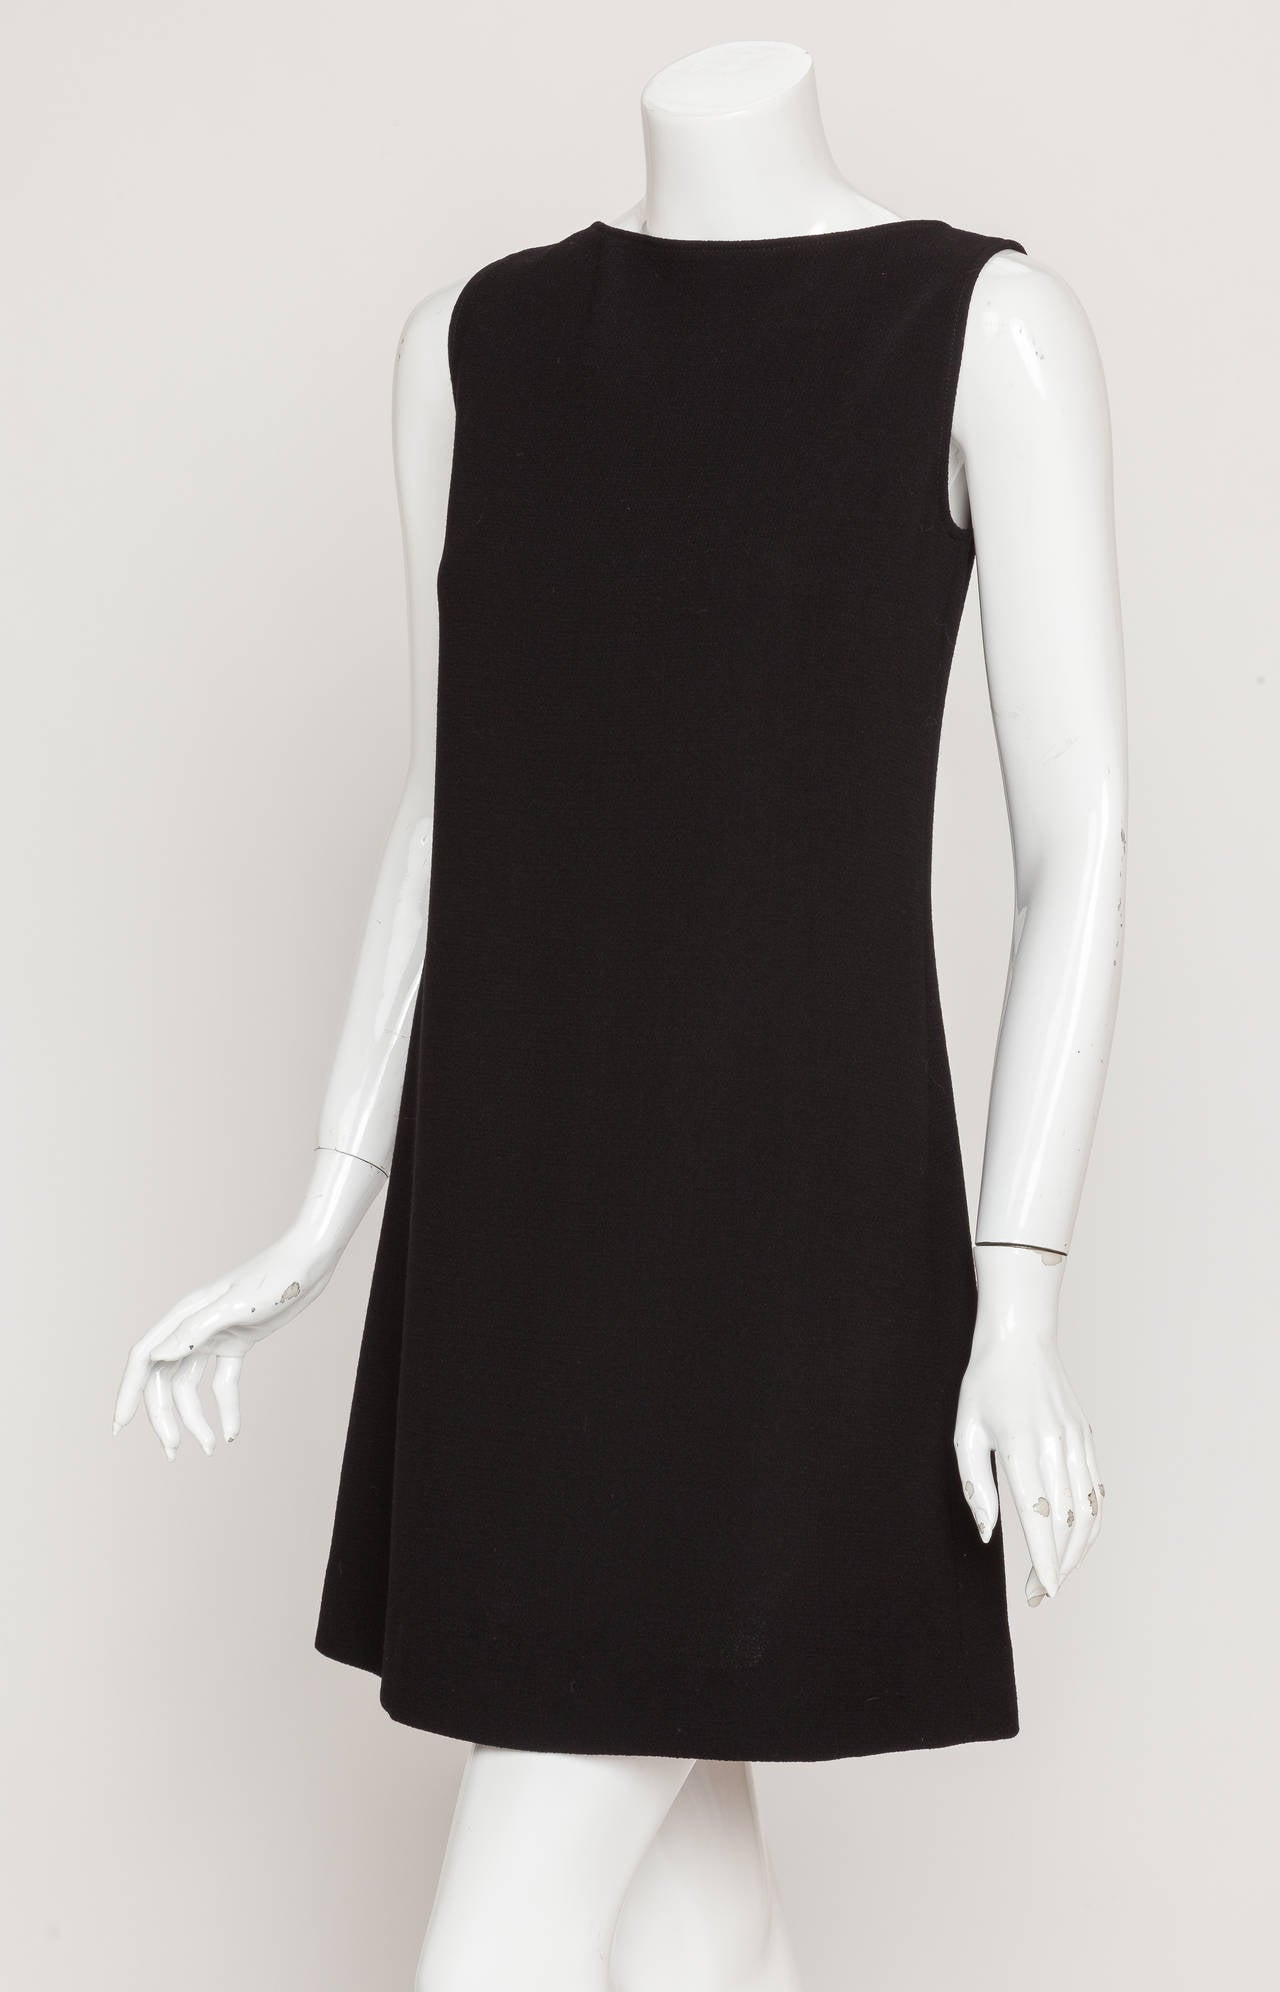 A vintage Pierre Cardin black wool crepe shift dress with three cutouts at the back. The dress fastens at the back with a hook and eye behind a small satin bow at the neck. No fabric tag but size tag is 38. In excellent condition. Labeled: Pierre